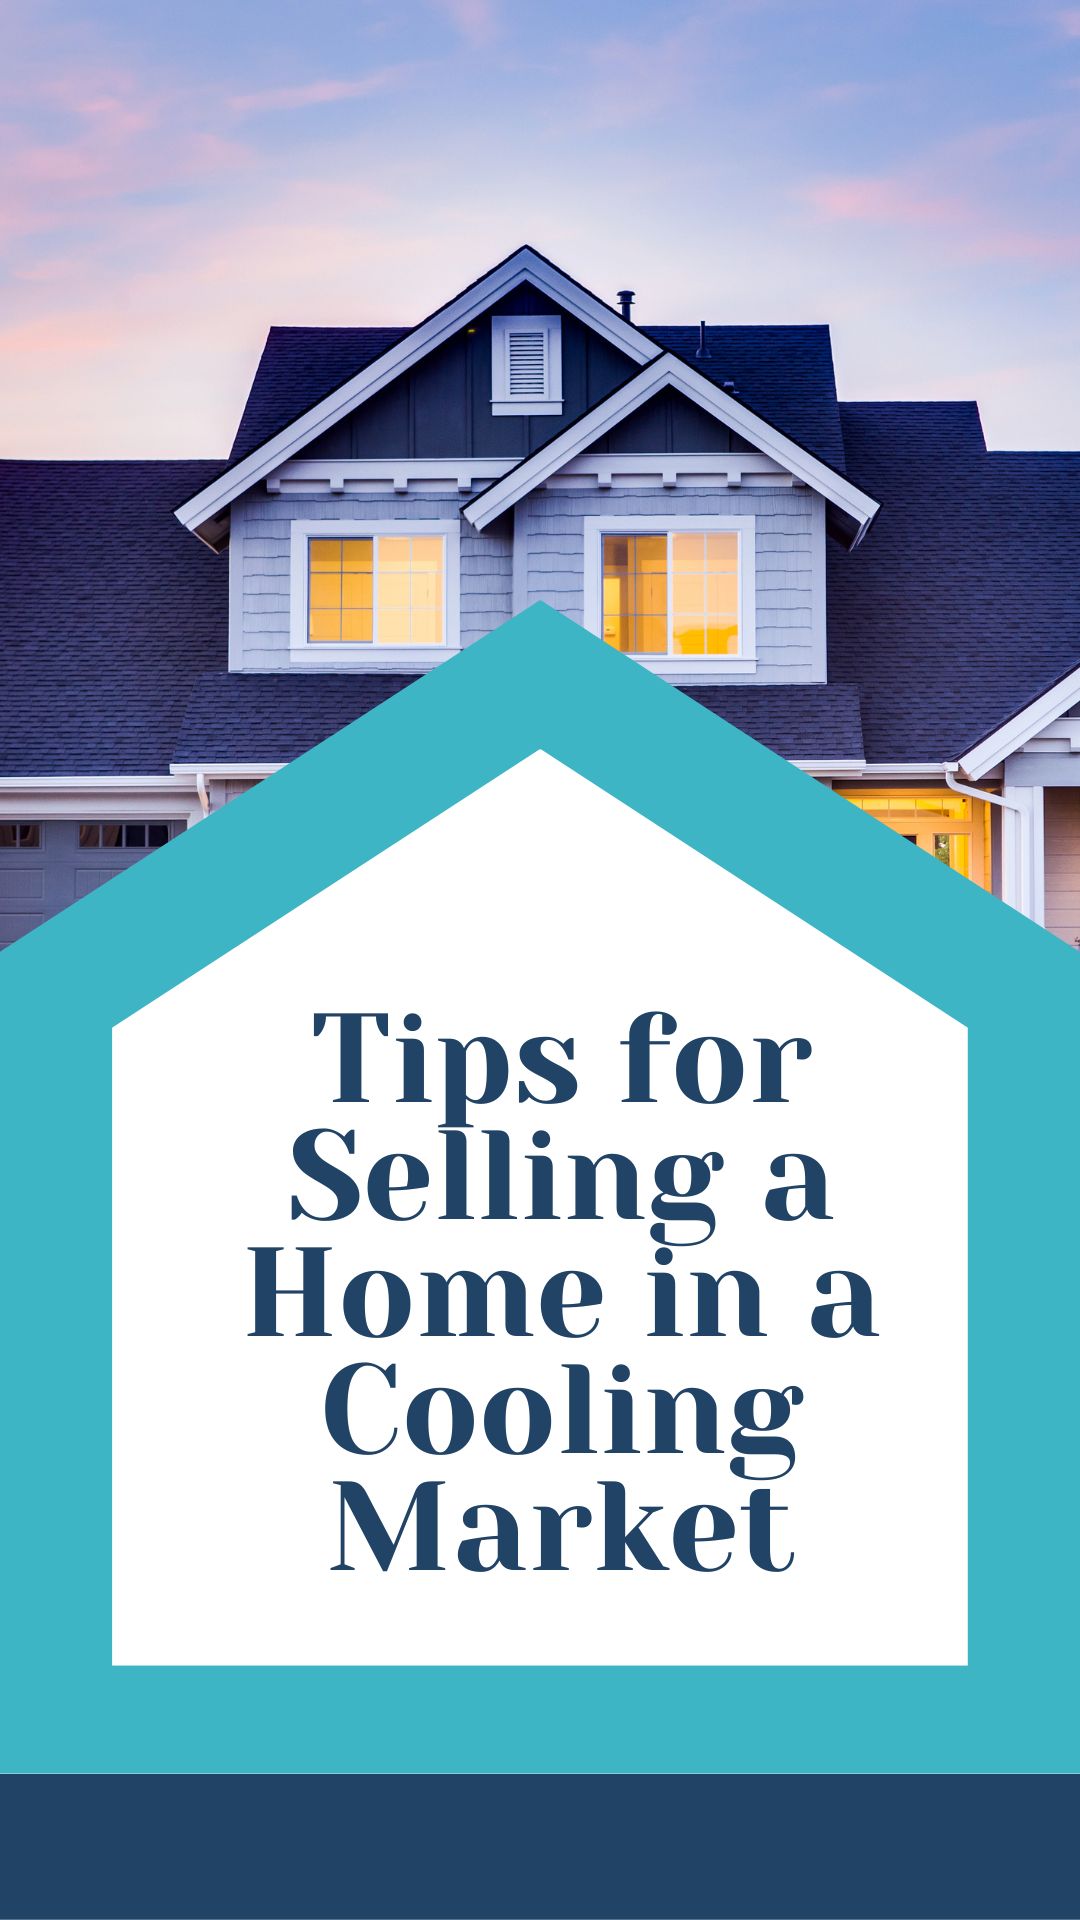 TIps to Selling a Home in a Cooling Market